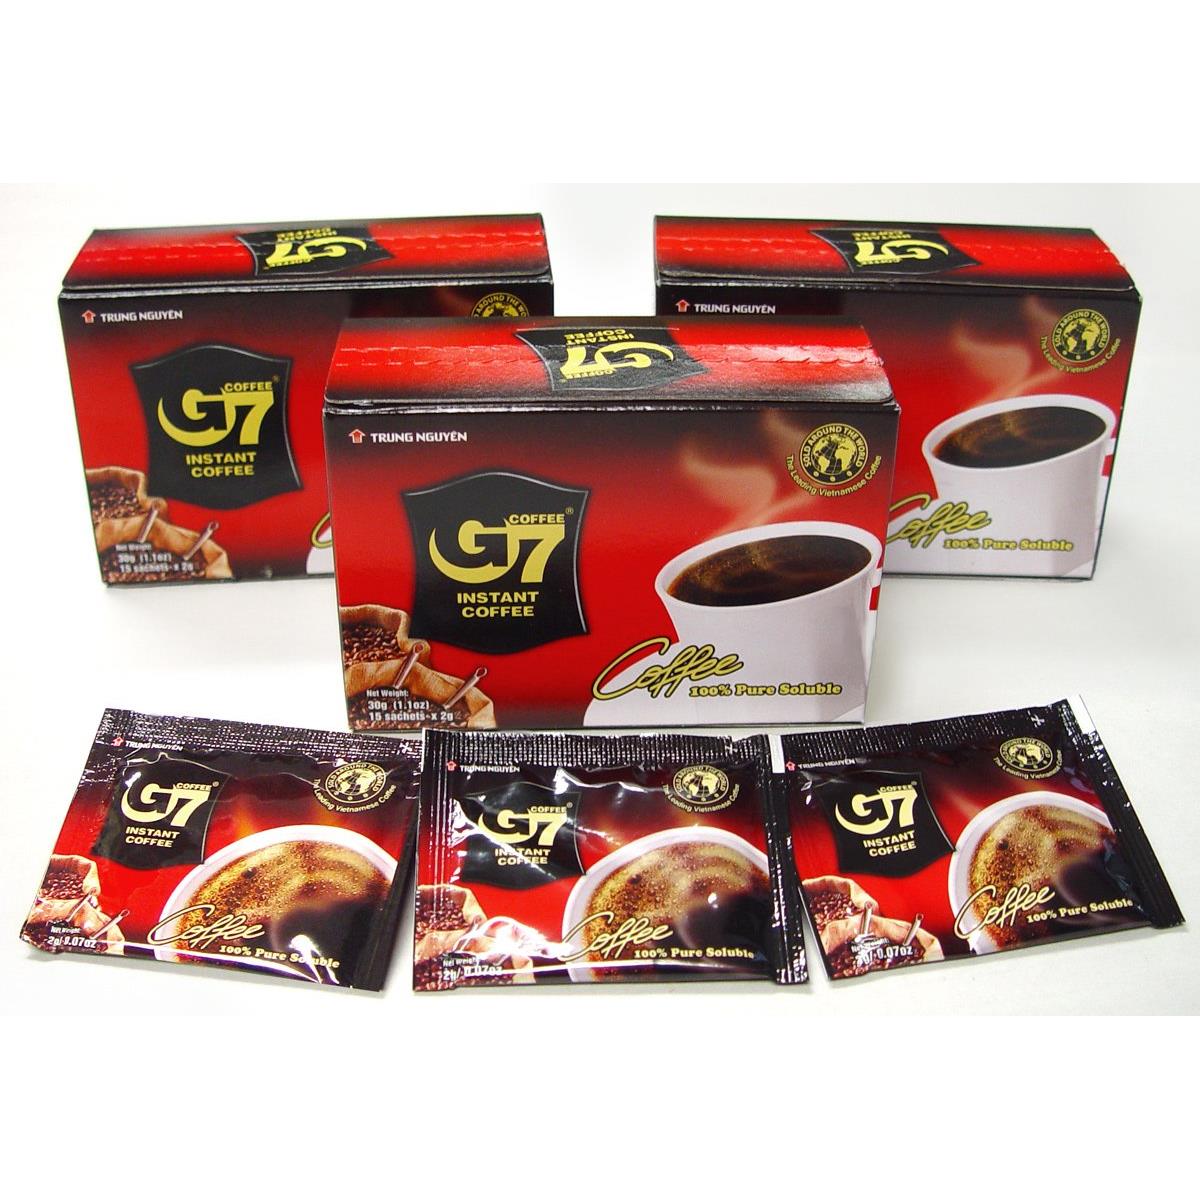 Trung Nguyen G7 - Pure Black Instant Coffee, 45 Servings, Pack of 3